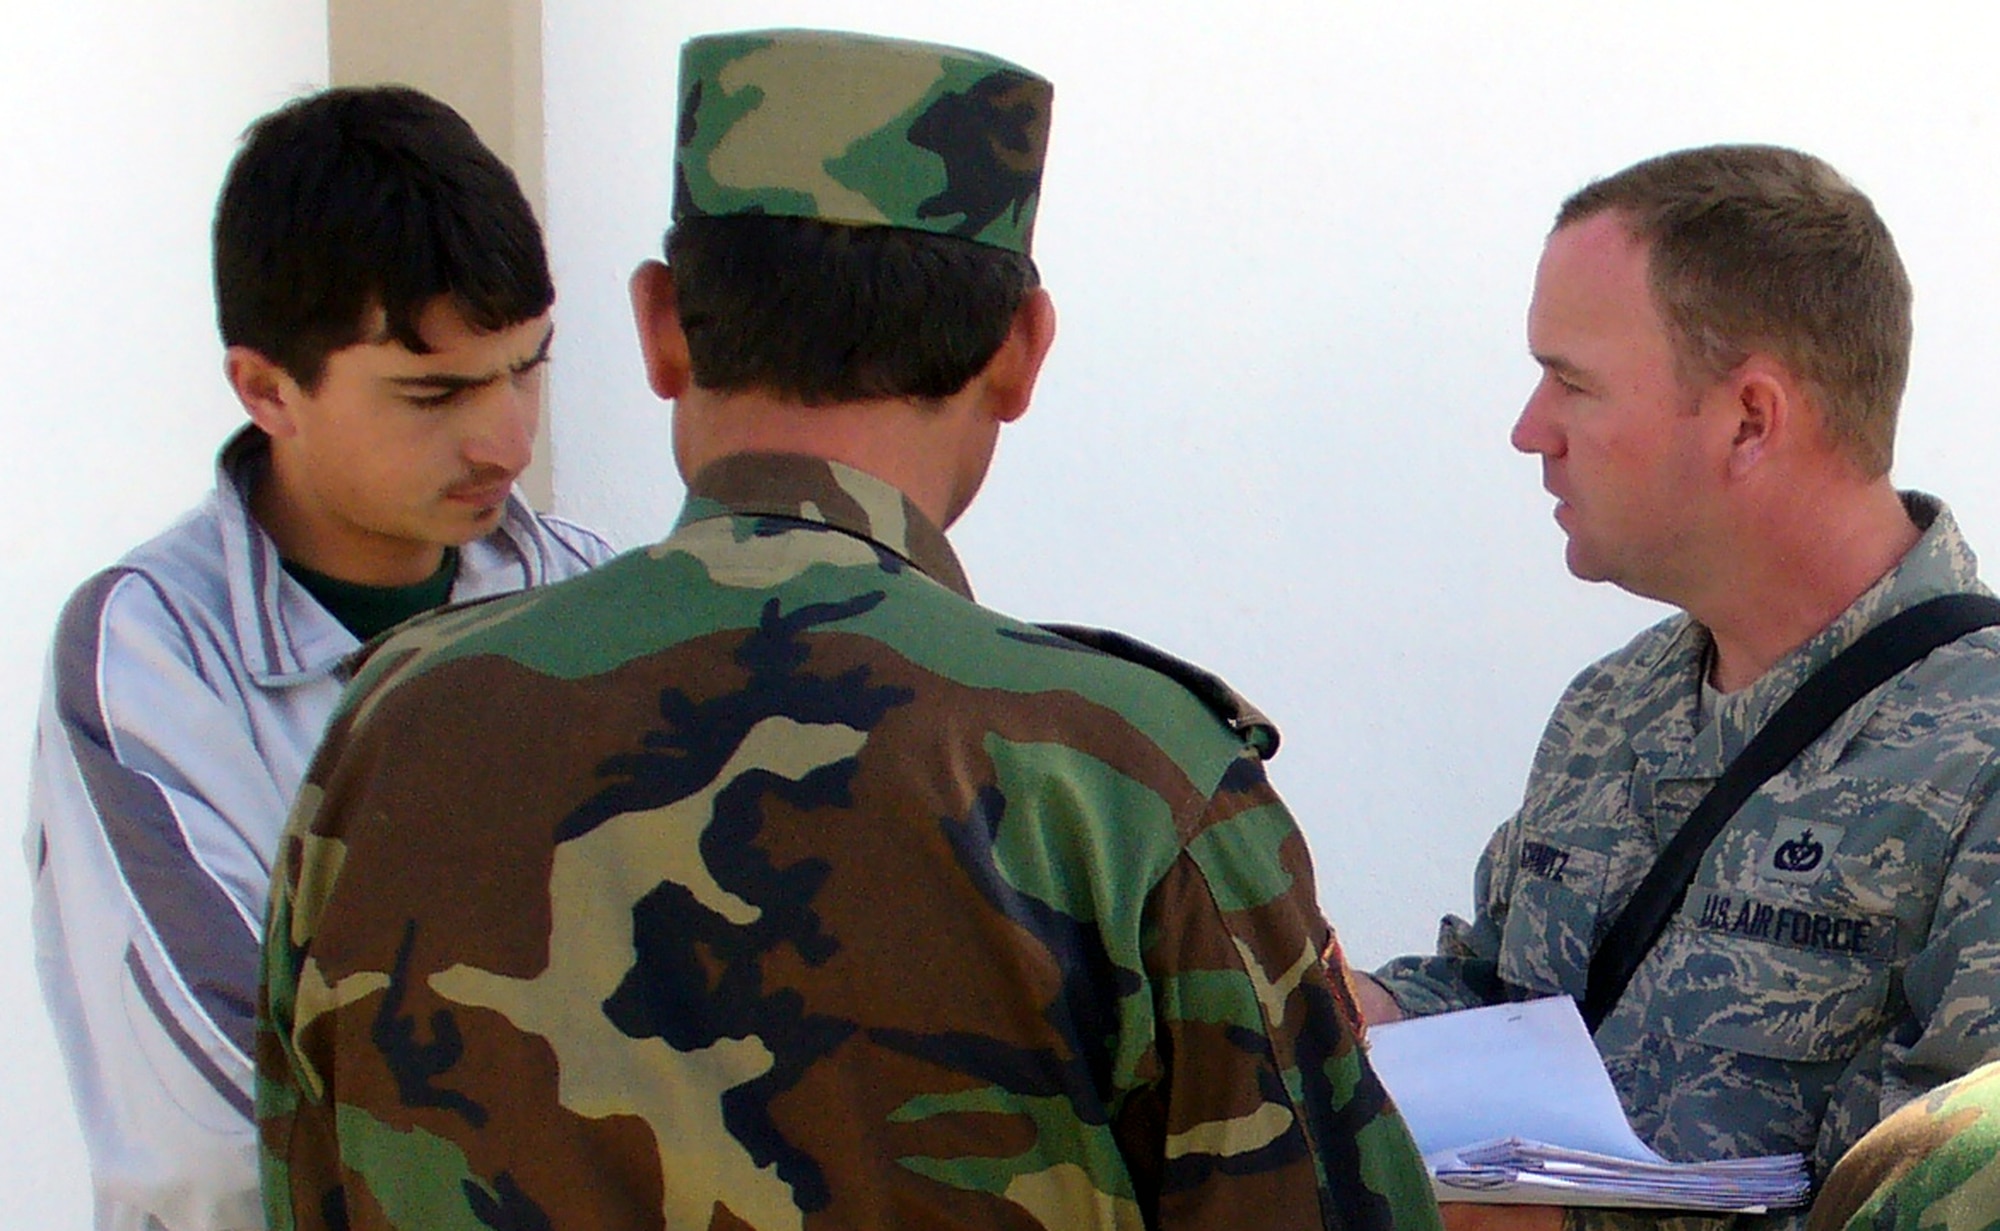 Tech. Sgt. Samuel Schmitz (right), contingency skills instructor from the U.S. Air Force Expeditionary Center's 421st Combat Training Squadron at Fort Dix, N.J., talks with an Afghan National Army soldier through an interpreter in a village near Kabul, Afghanistan, Sept. 29, 2007 during his deployment there.  Sergeant Schmitz, an Air Force civil engineering power production specialist, deployed as an Afghan National Army Central Movement Agency Mentor from January 2007 to February 2008.  (U.S. Air Force Photo)